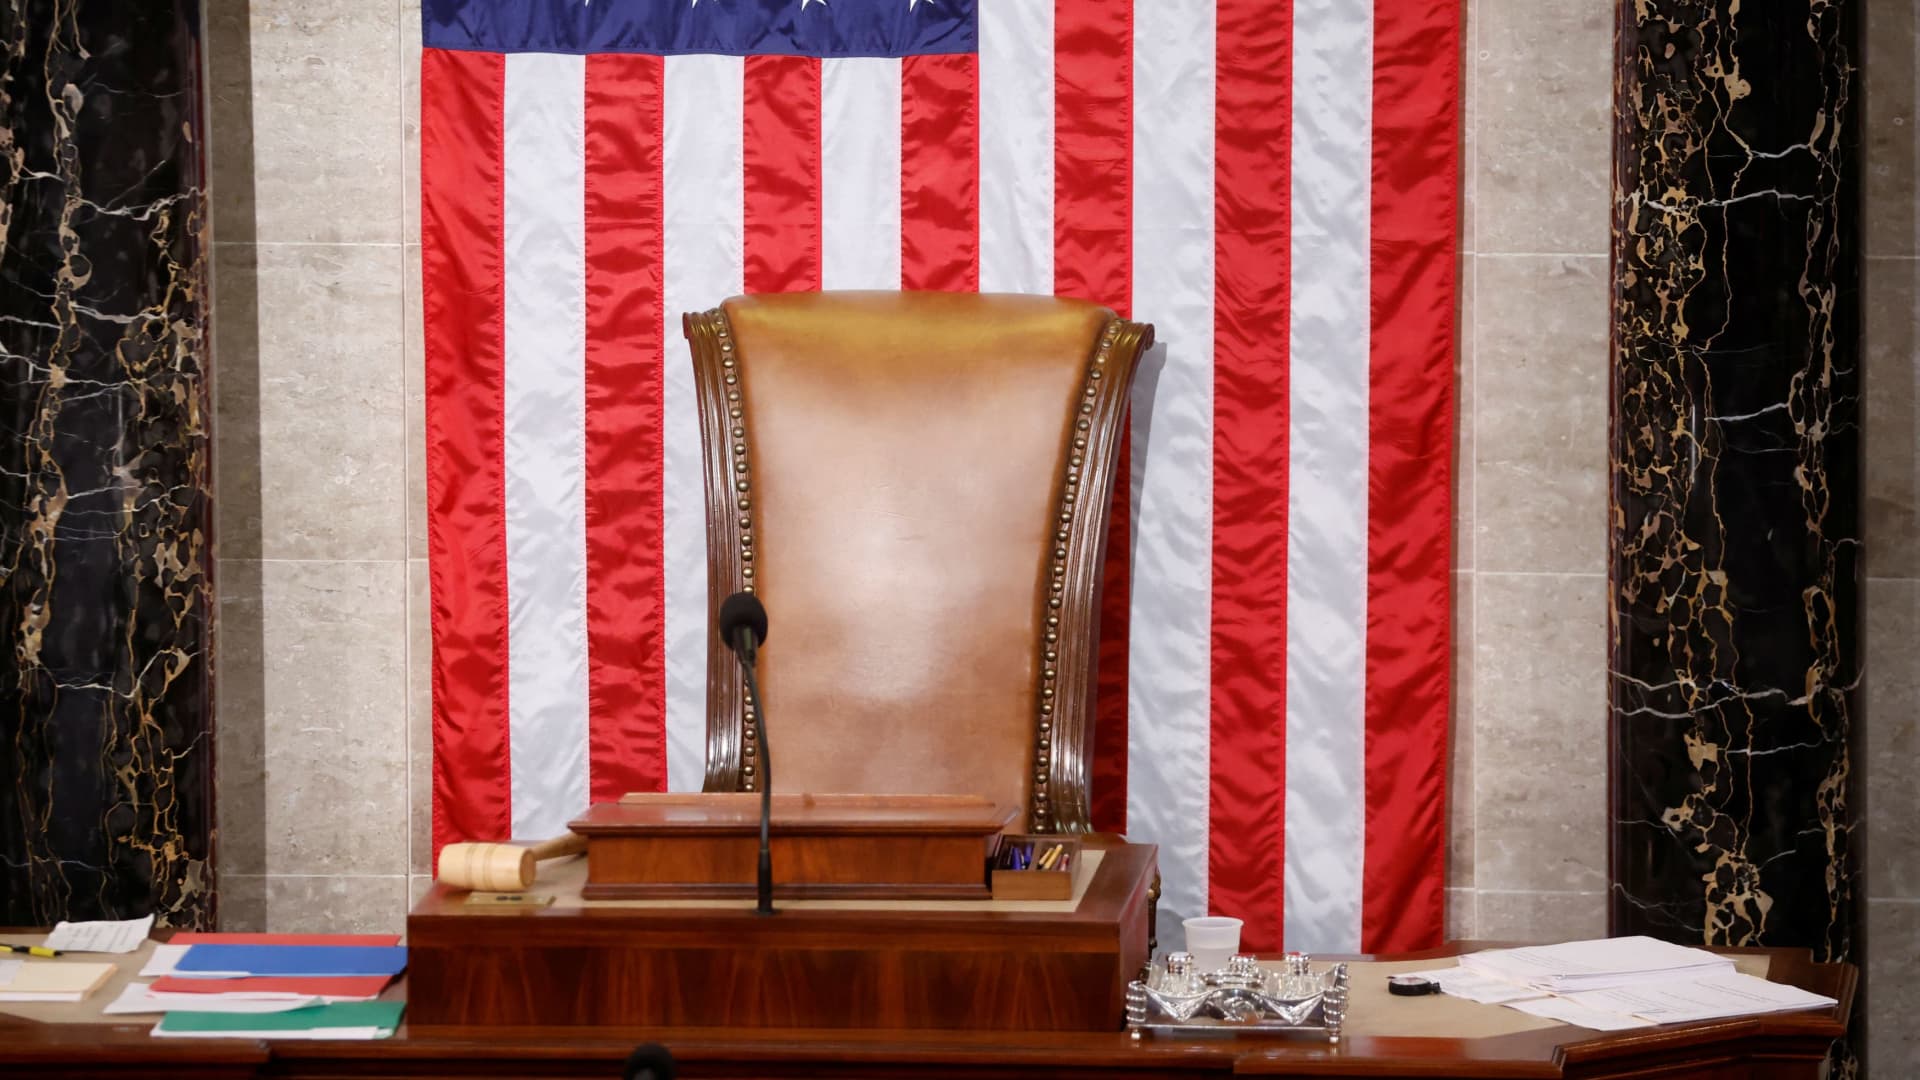 The chair of the Speaker of the U.S. House of Representatives sits empty as the House embarks on another round of voting for a new House Speaker on the second day of the 118th Congress at the U.S. Capitol in Washington, U.S., January 4, 2023. 